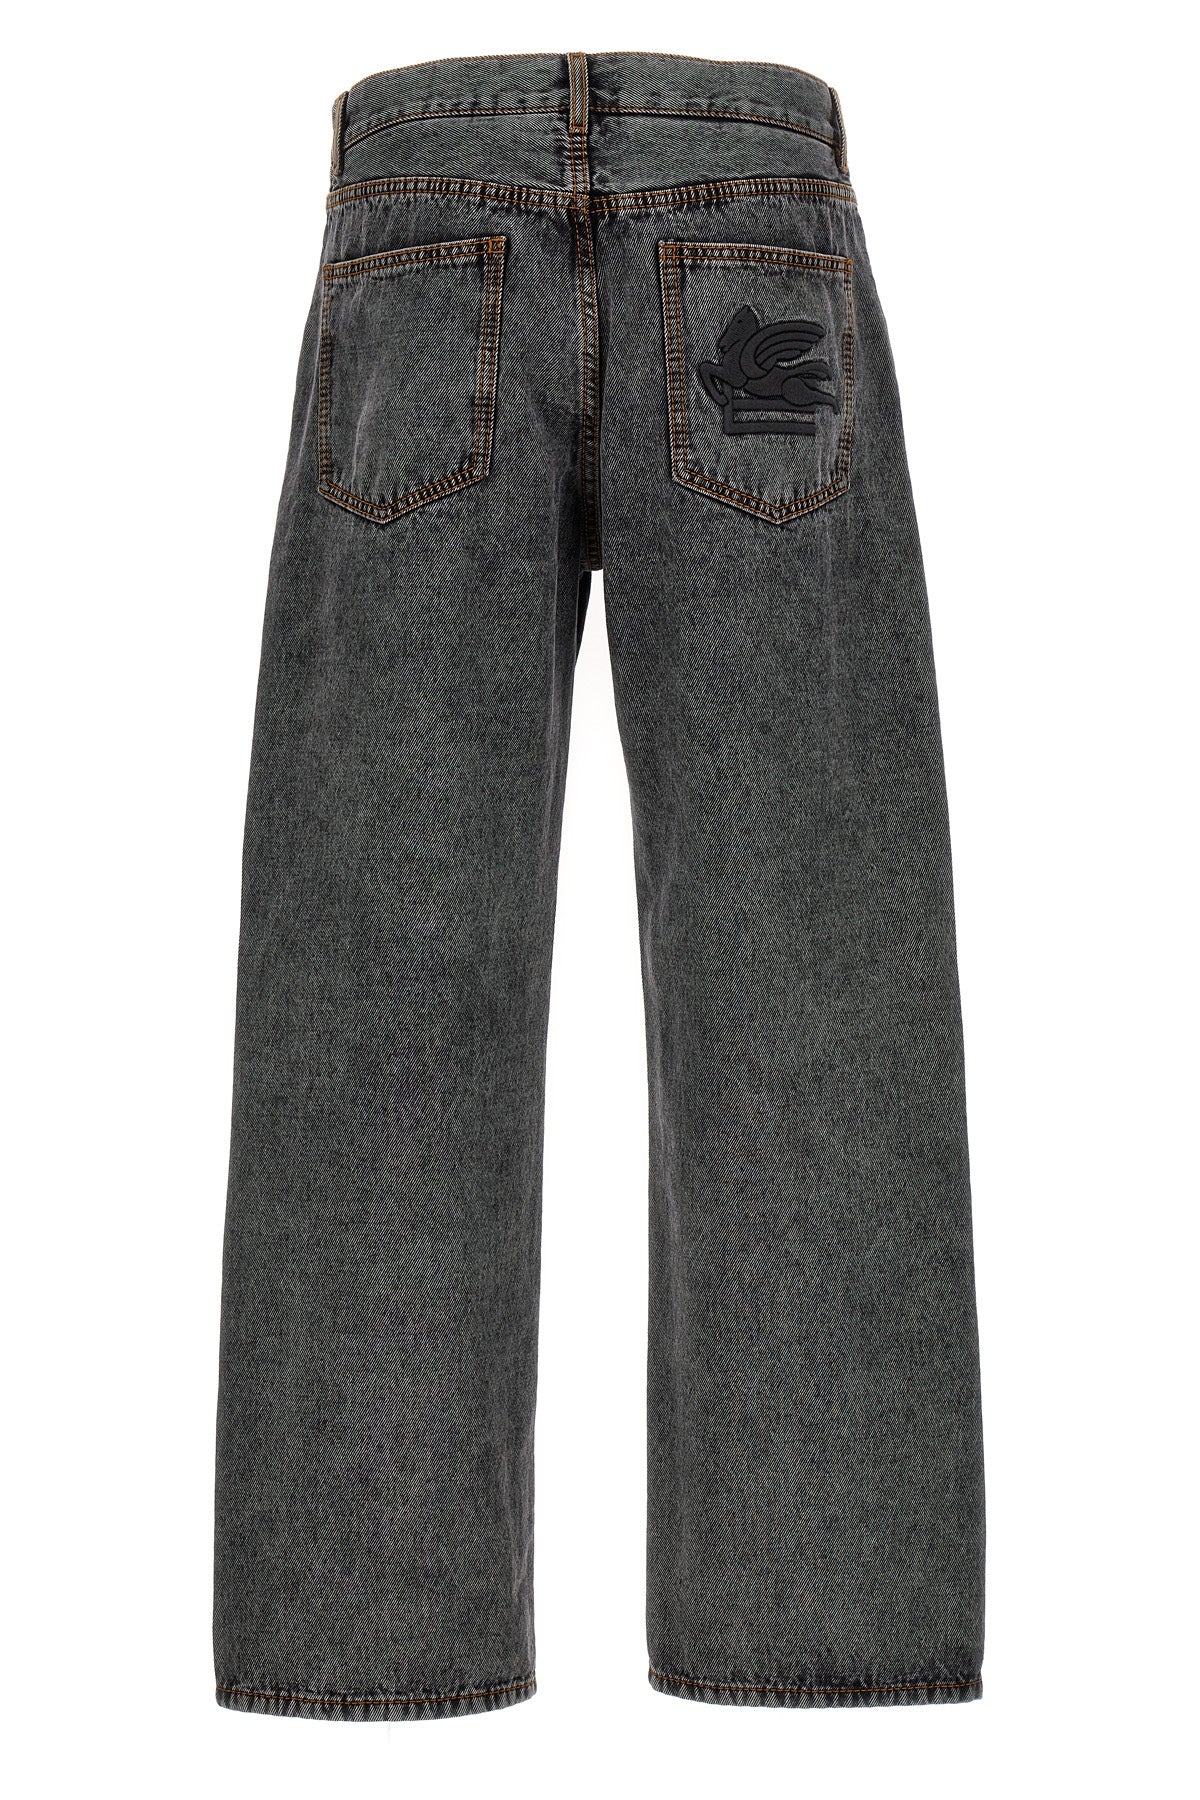 ETRO LOGO EMBROIDERY JEANS